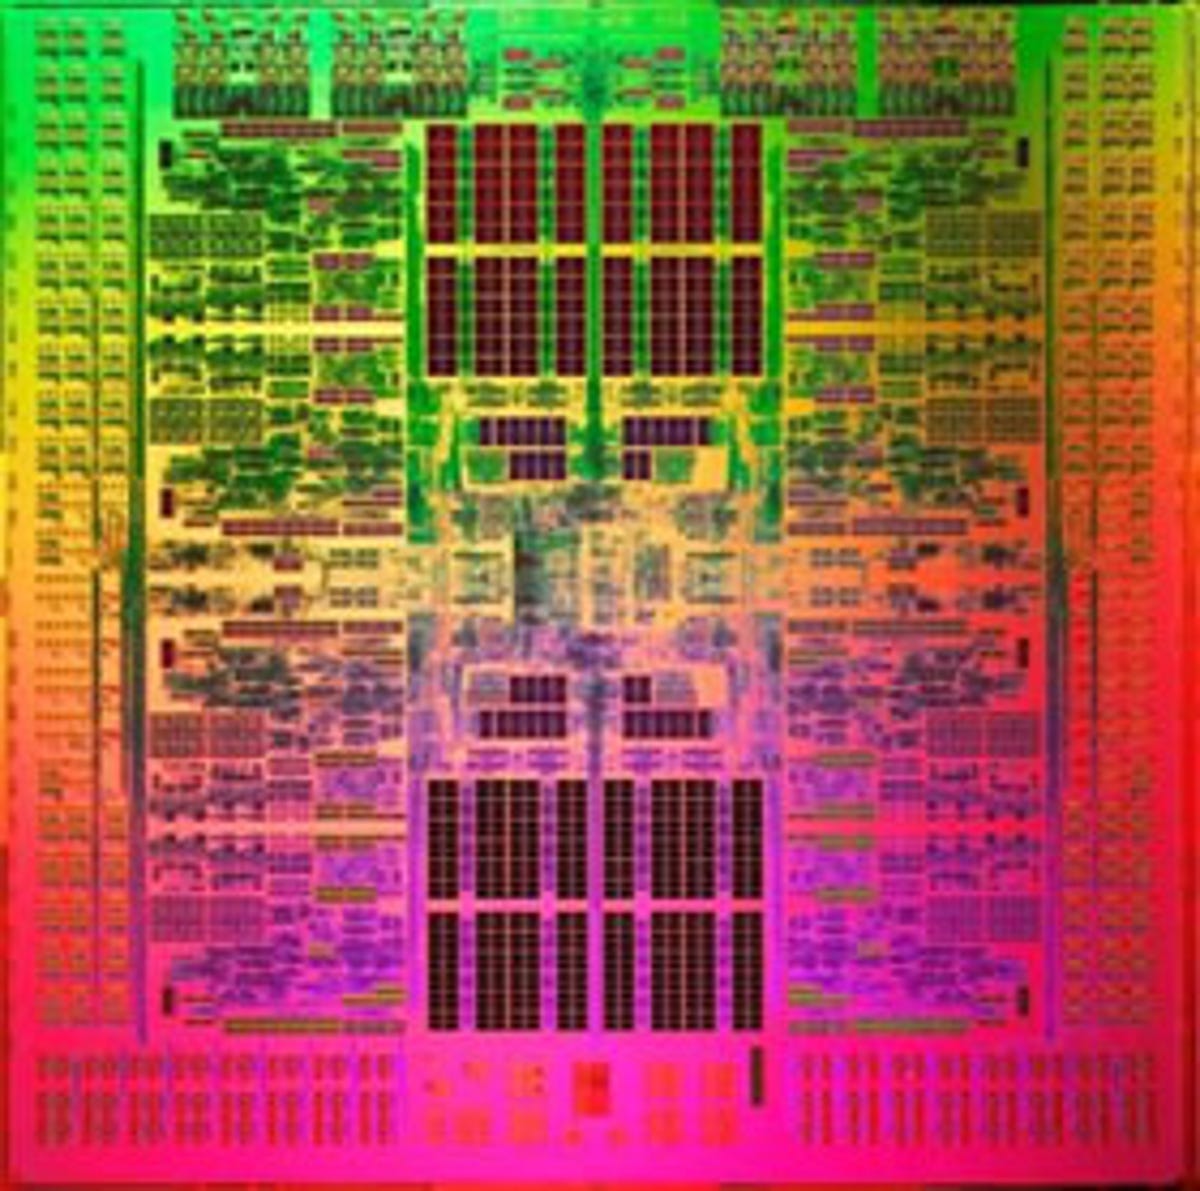 A view of Fujitsu's Sparc64 VIIIfx processor, an eight-core, 2.2GHz chip built on a 45-nanometer manufacturing process.